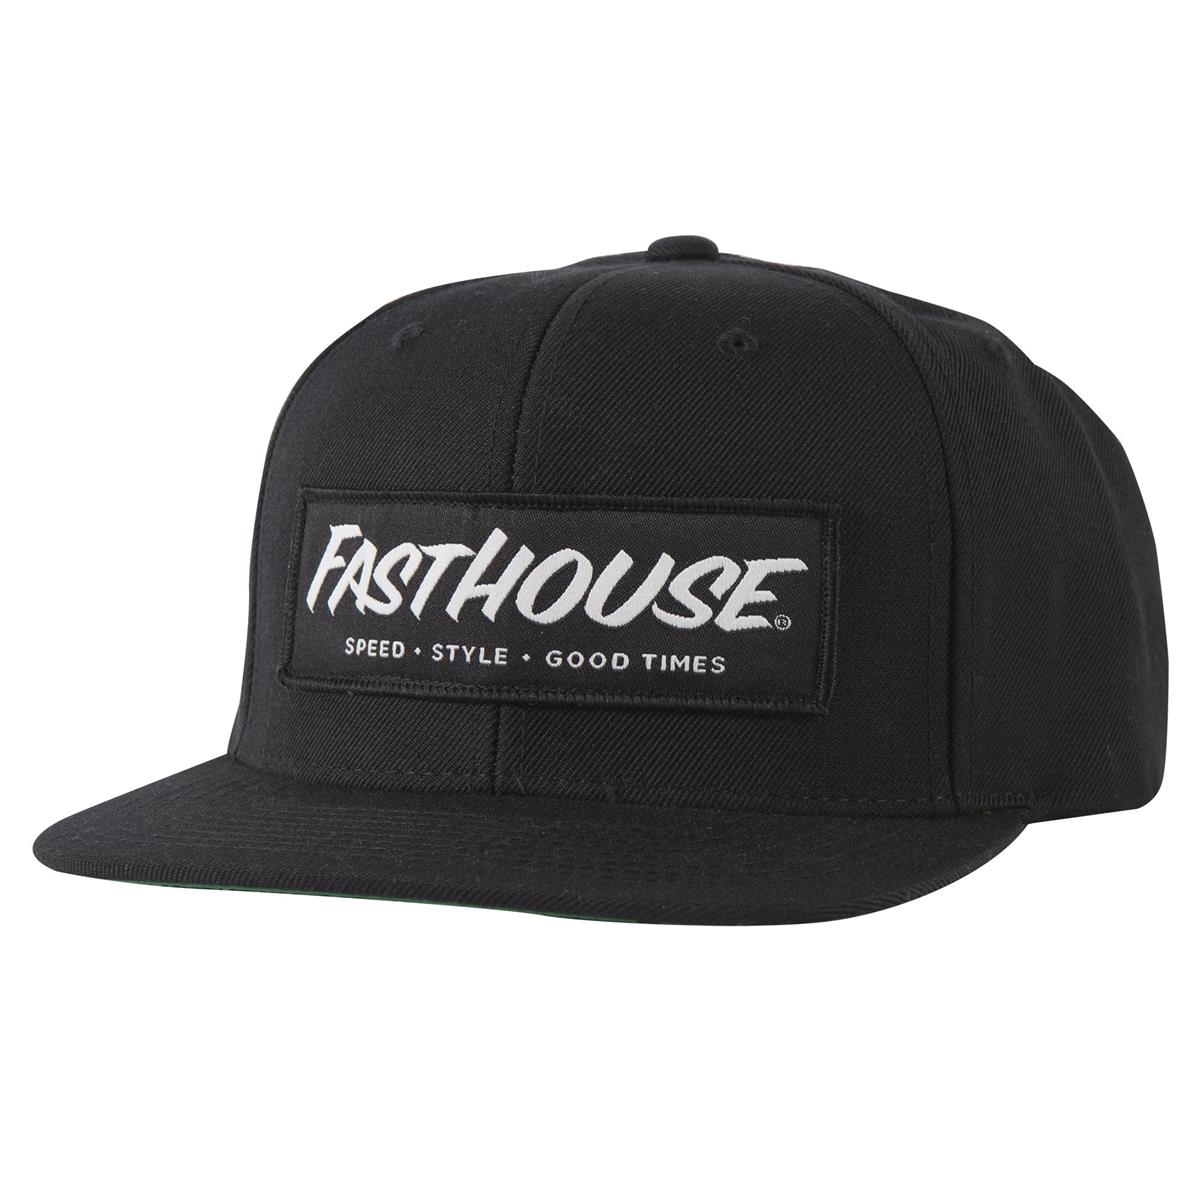 Fasthouse Casquette Snap Back Speedstyle Black